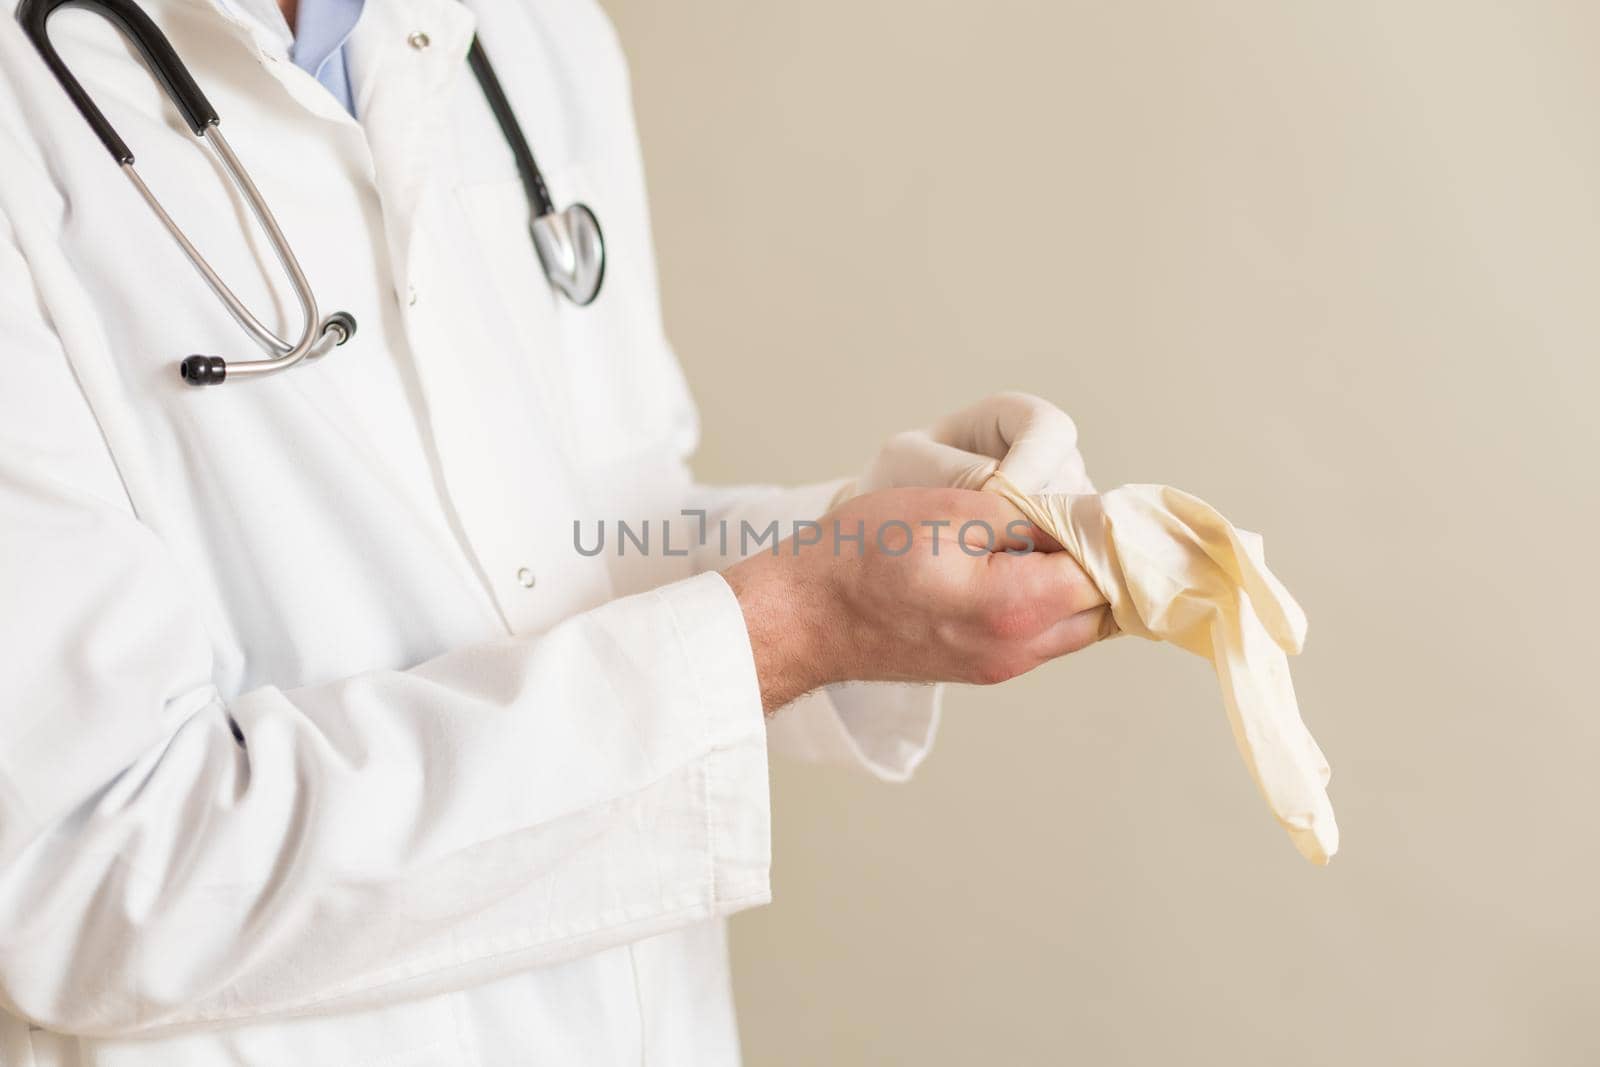 Male doctor putting on protective gloves by Bazdar